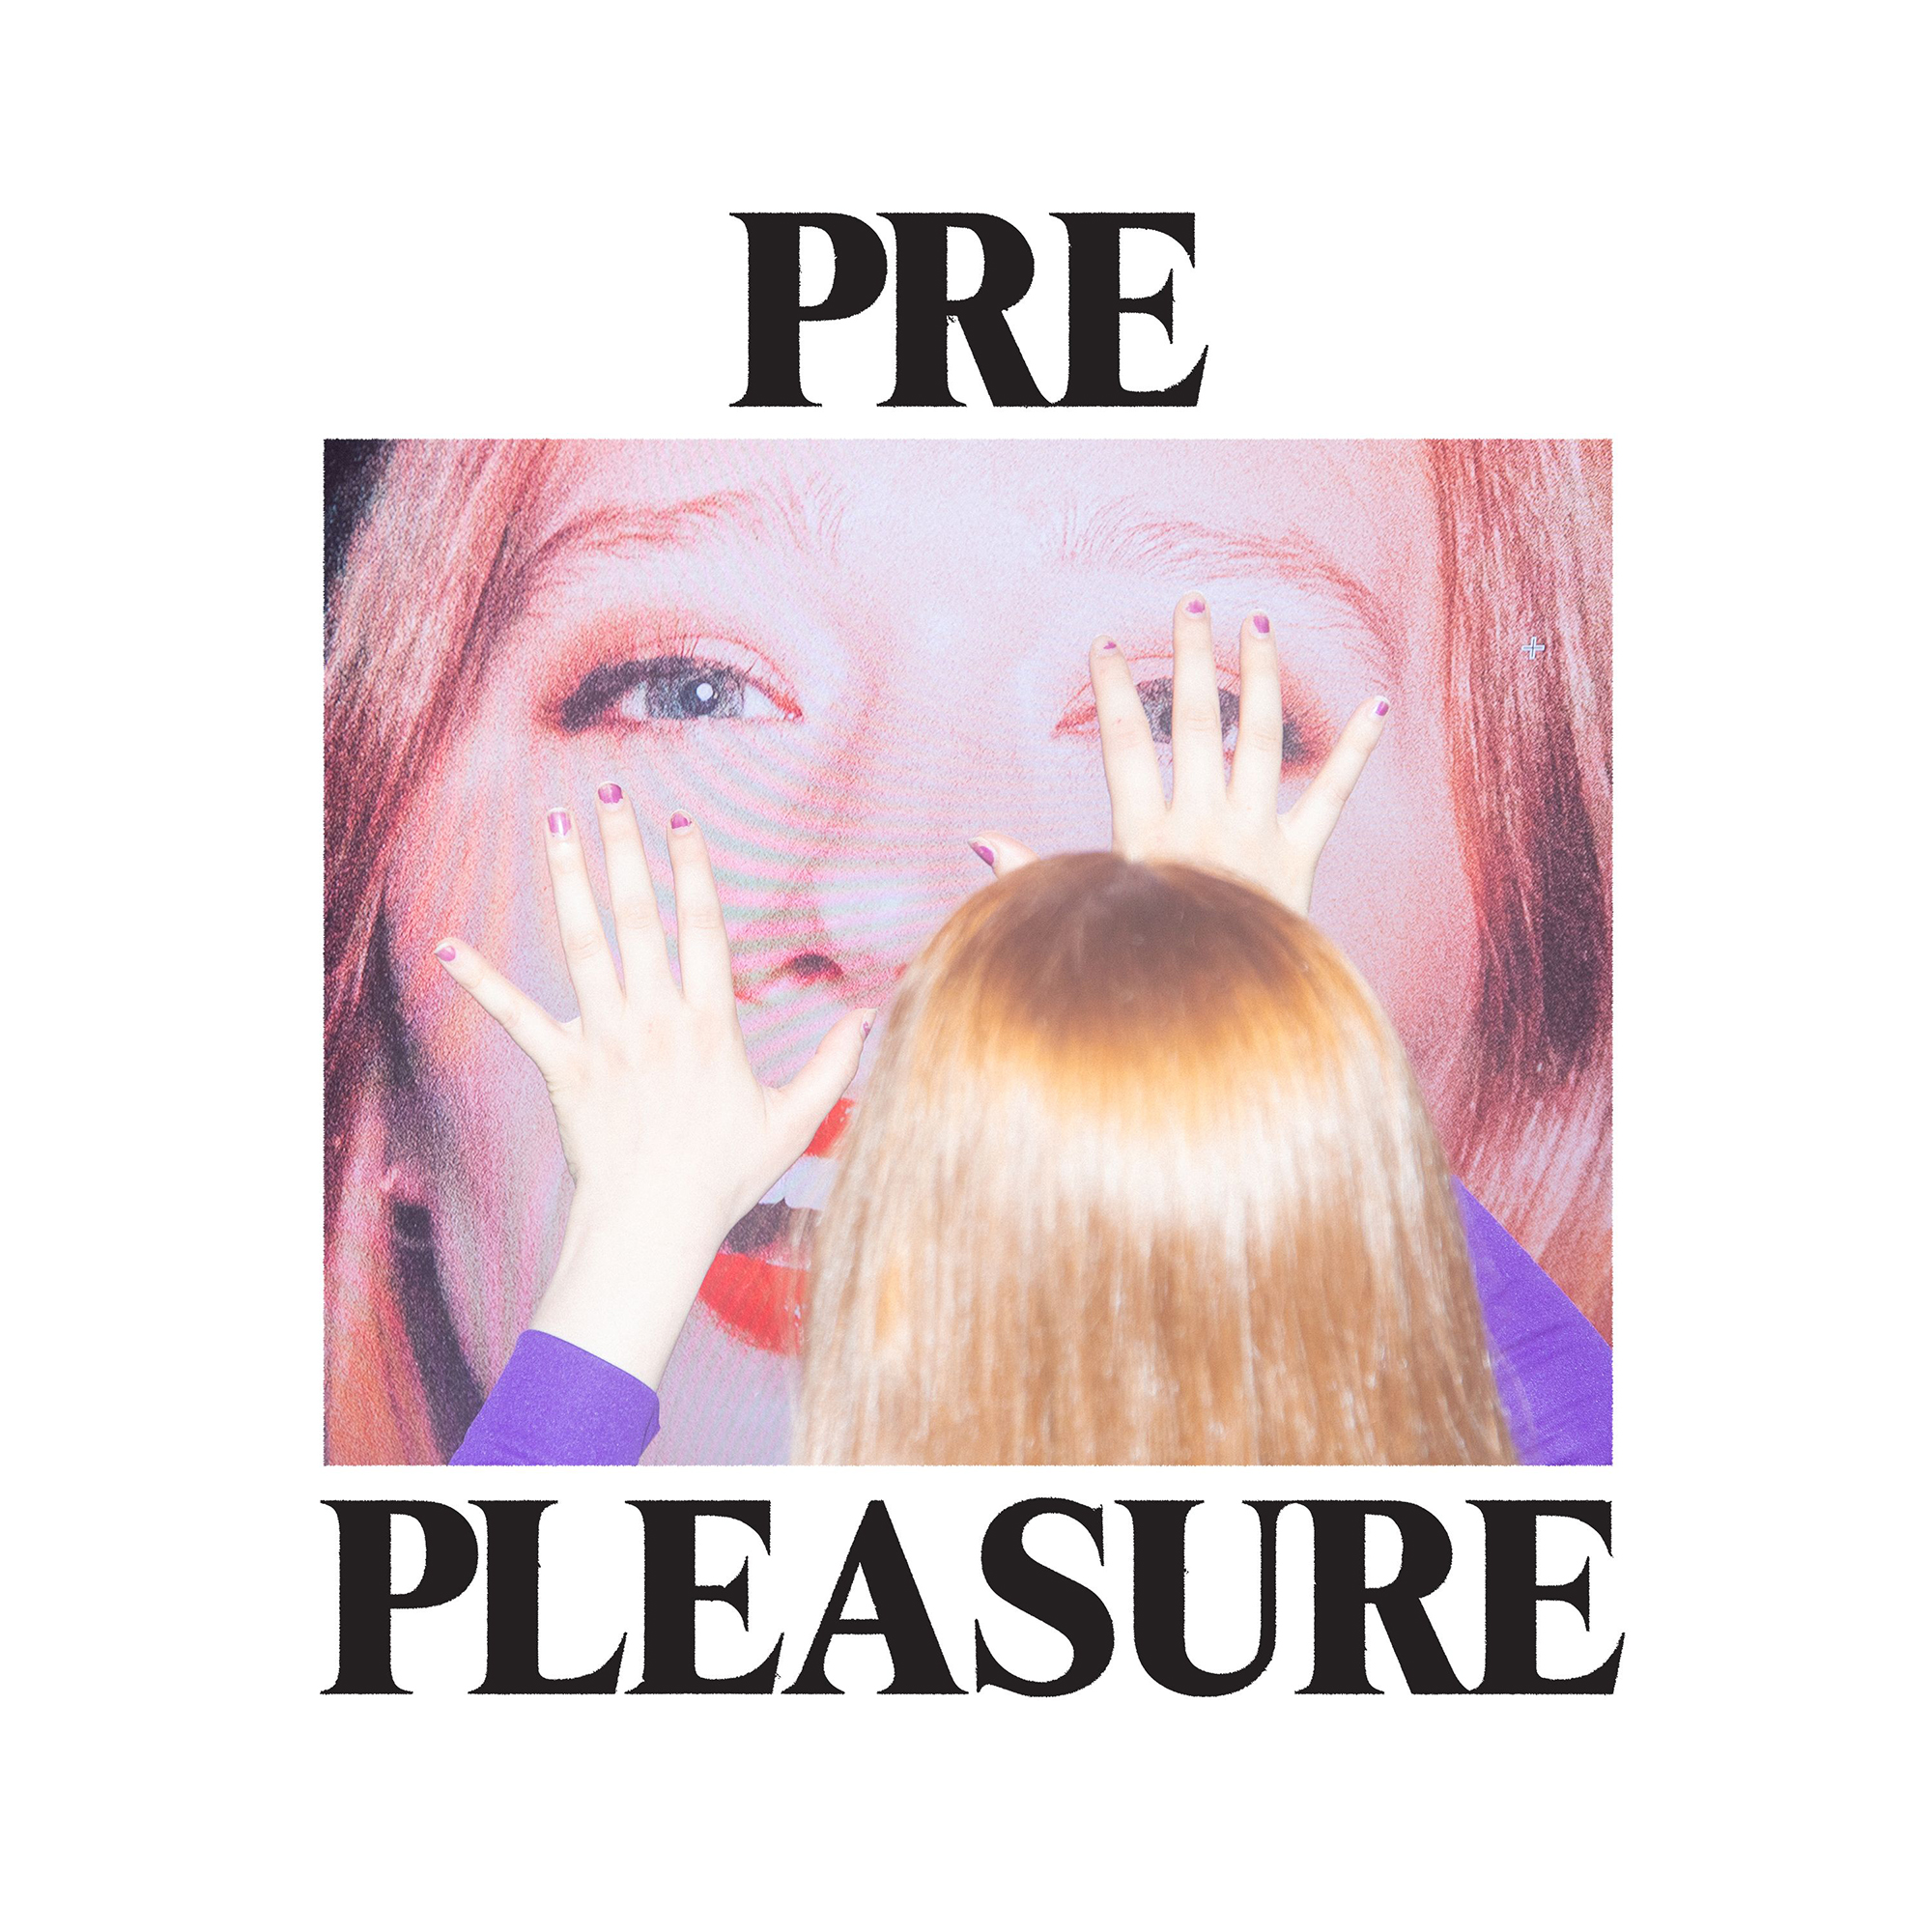 Sleepingxx - Julia Jacklin - New album PRE PLEASURE out August 26, 2022. Pre-order now  and stream the first single, \